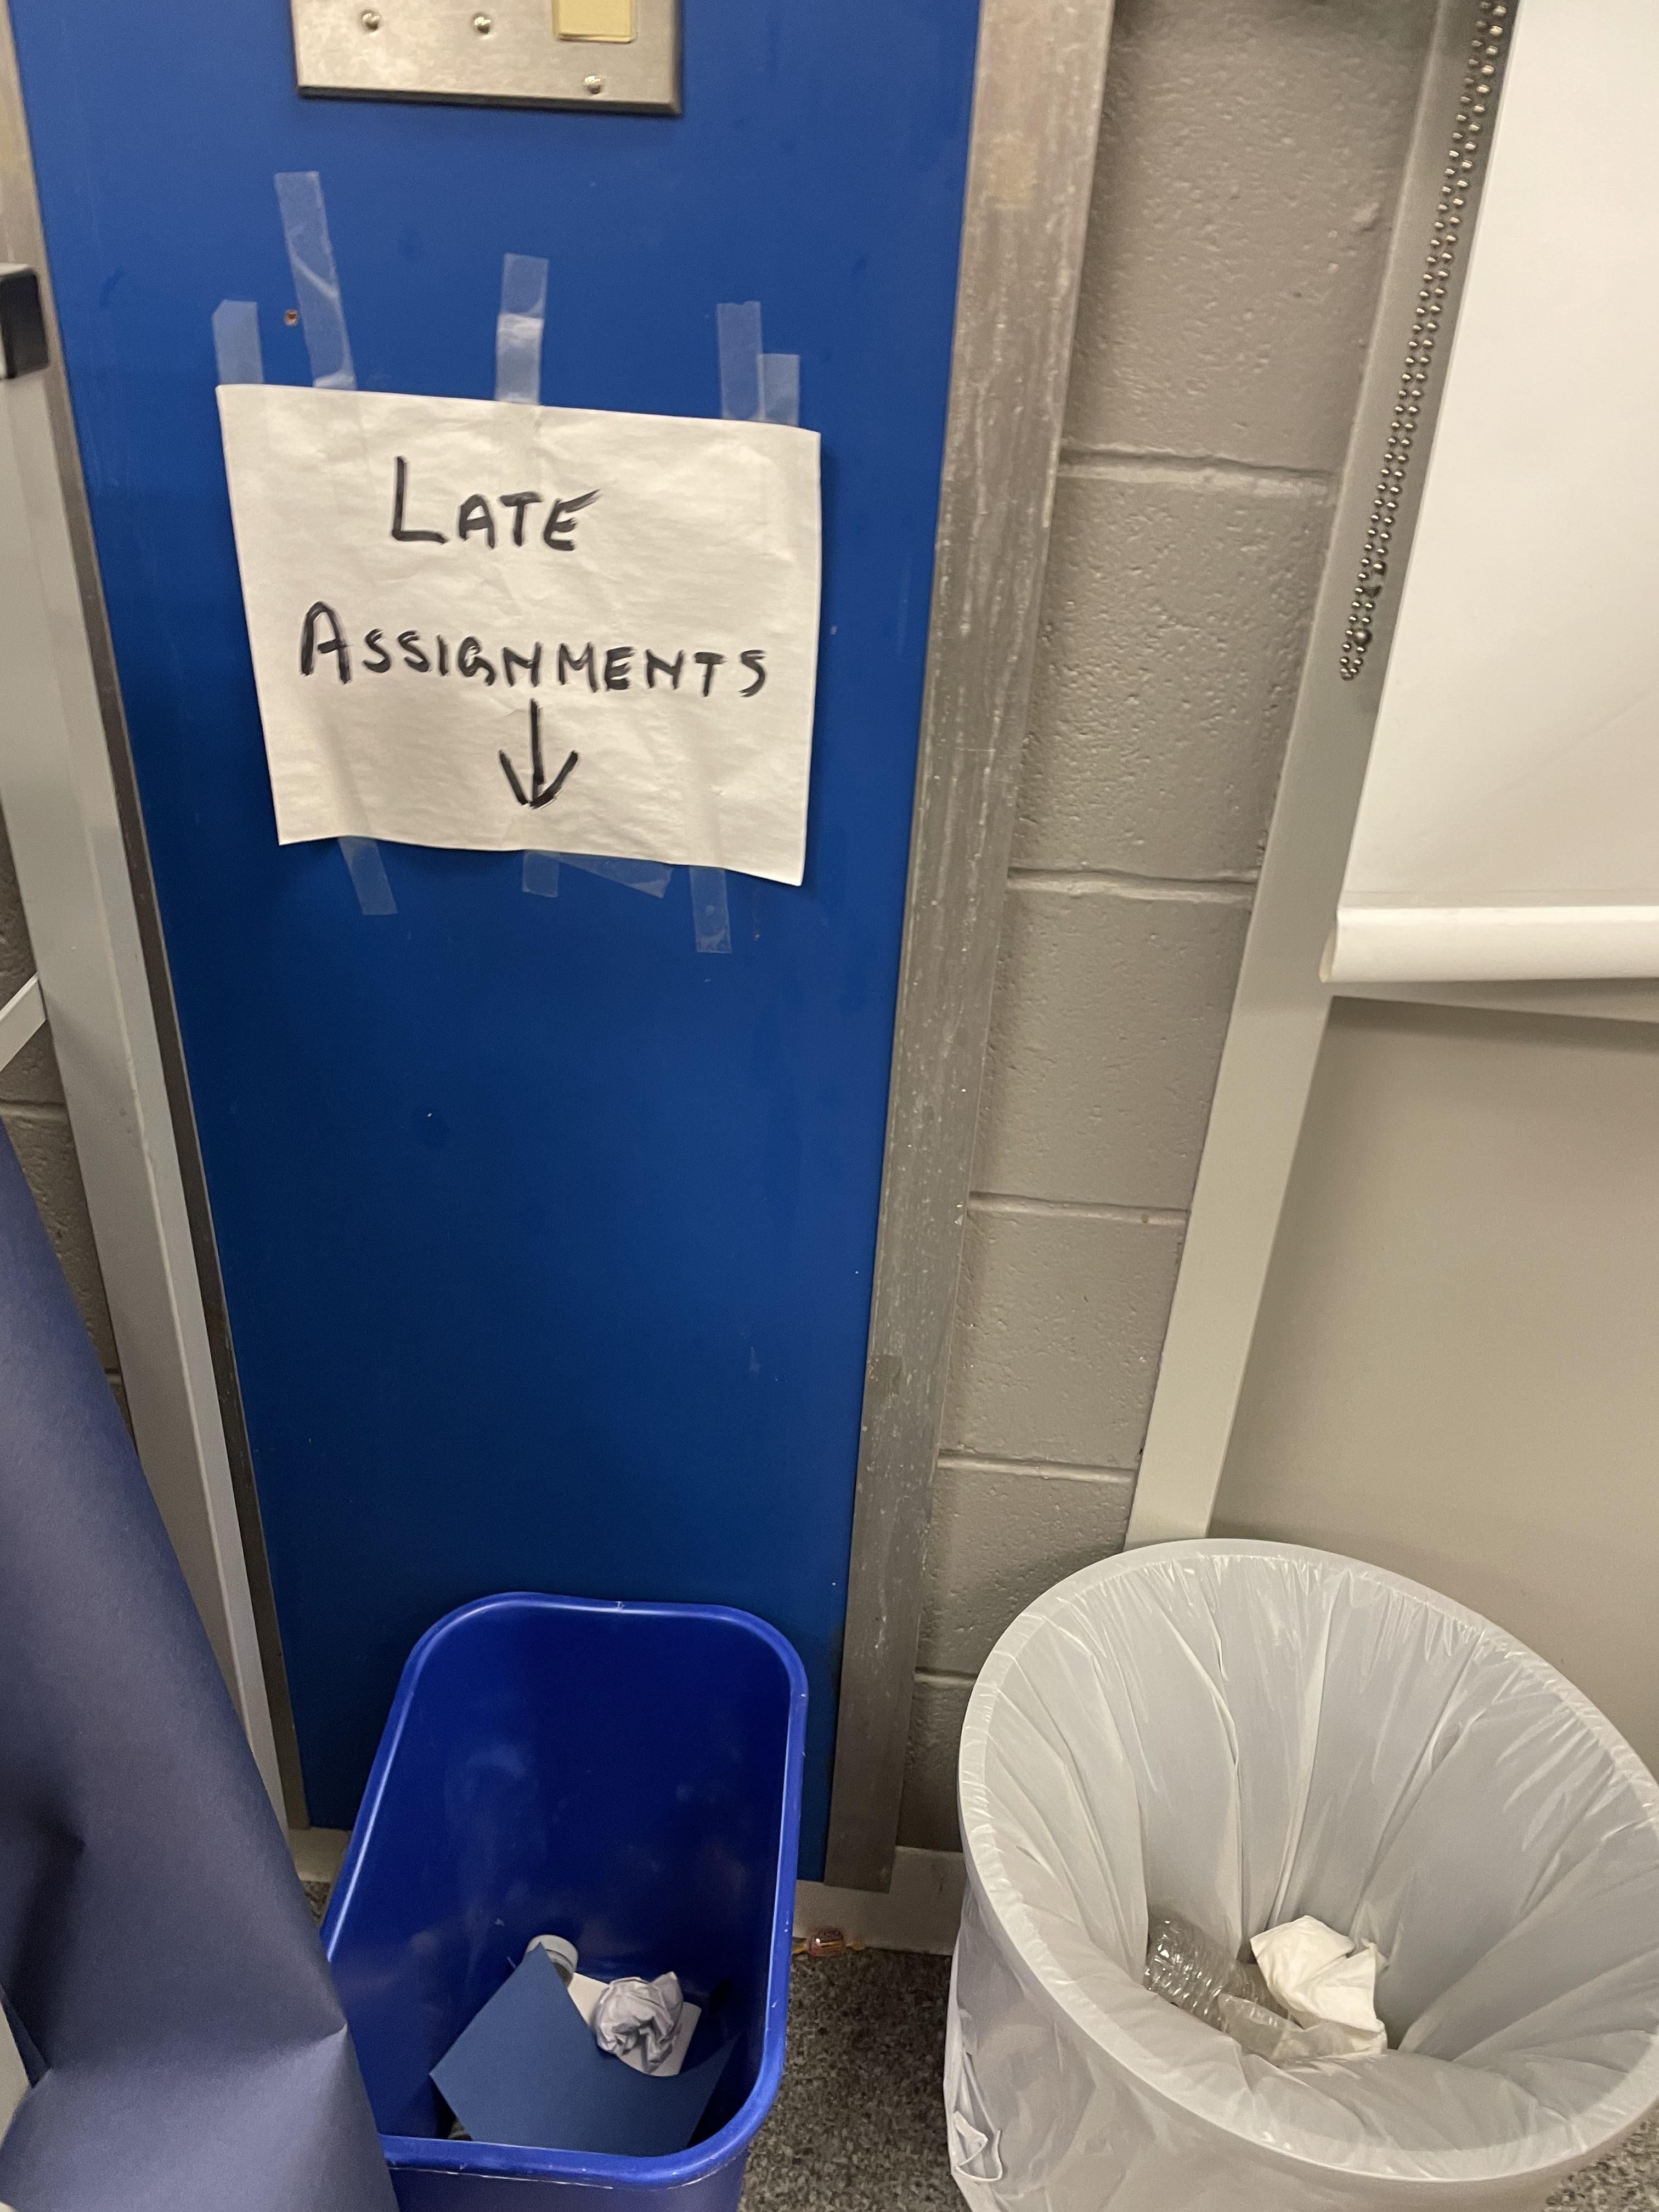 My teacher’s policy for late assignments.